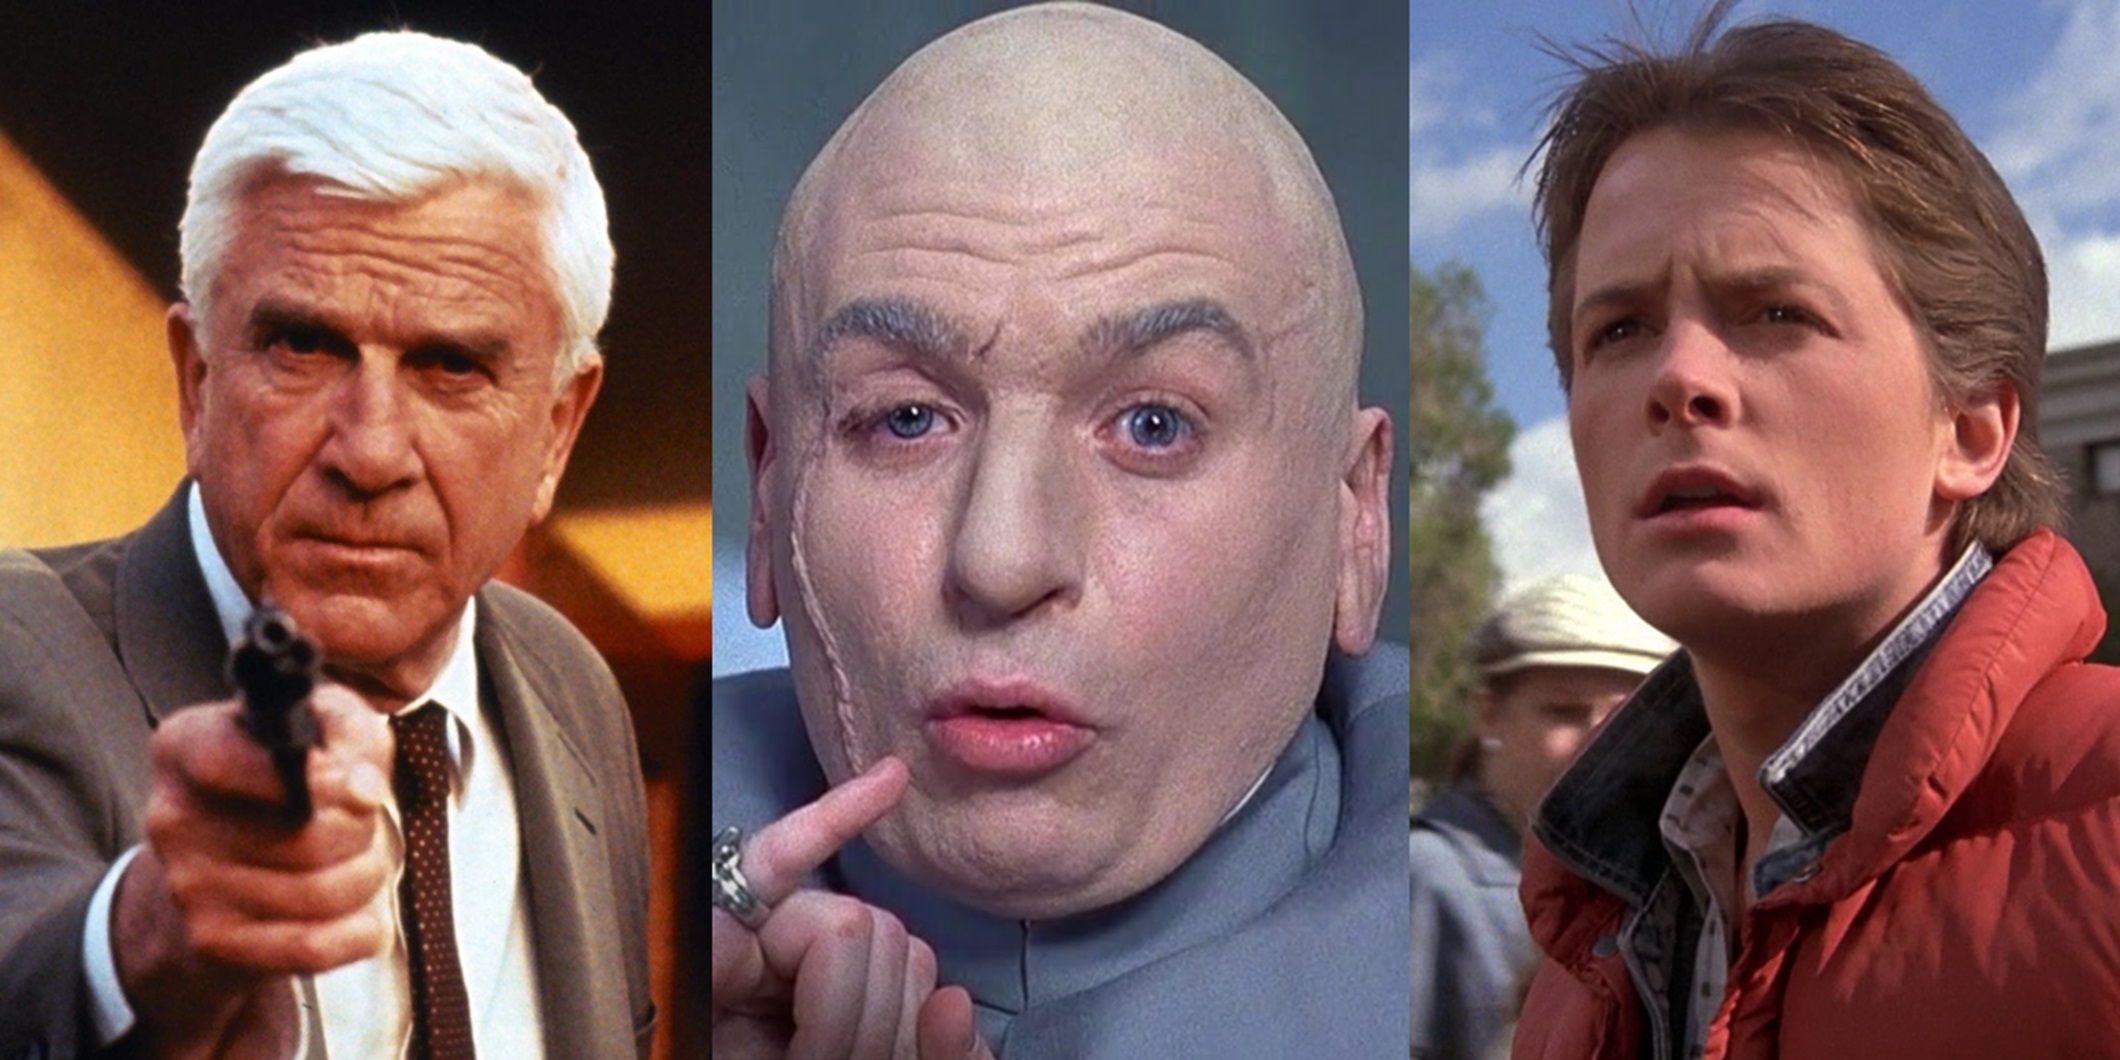 Split image of Frank Drebin in The Naked Gun, Dr Evil in Austin Powers, and Marty McFly in Back to the Future